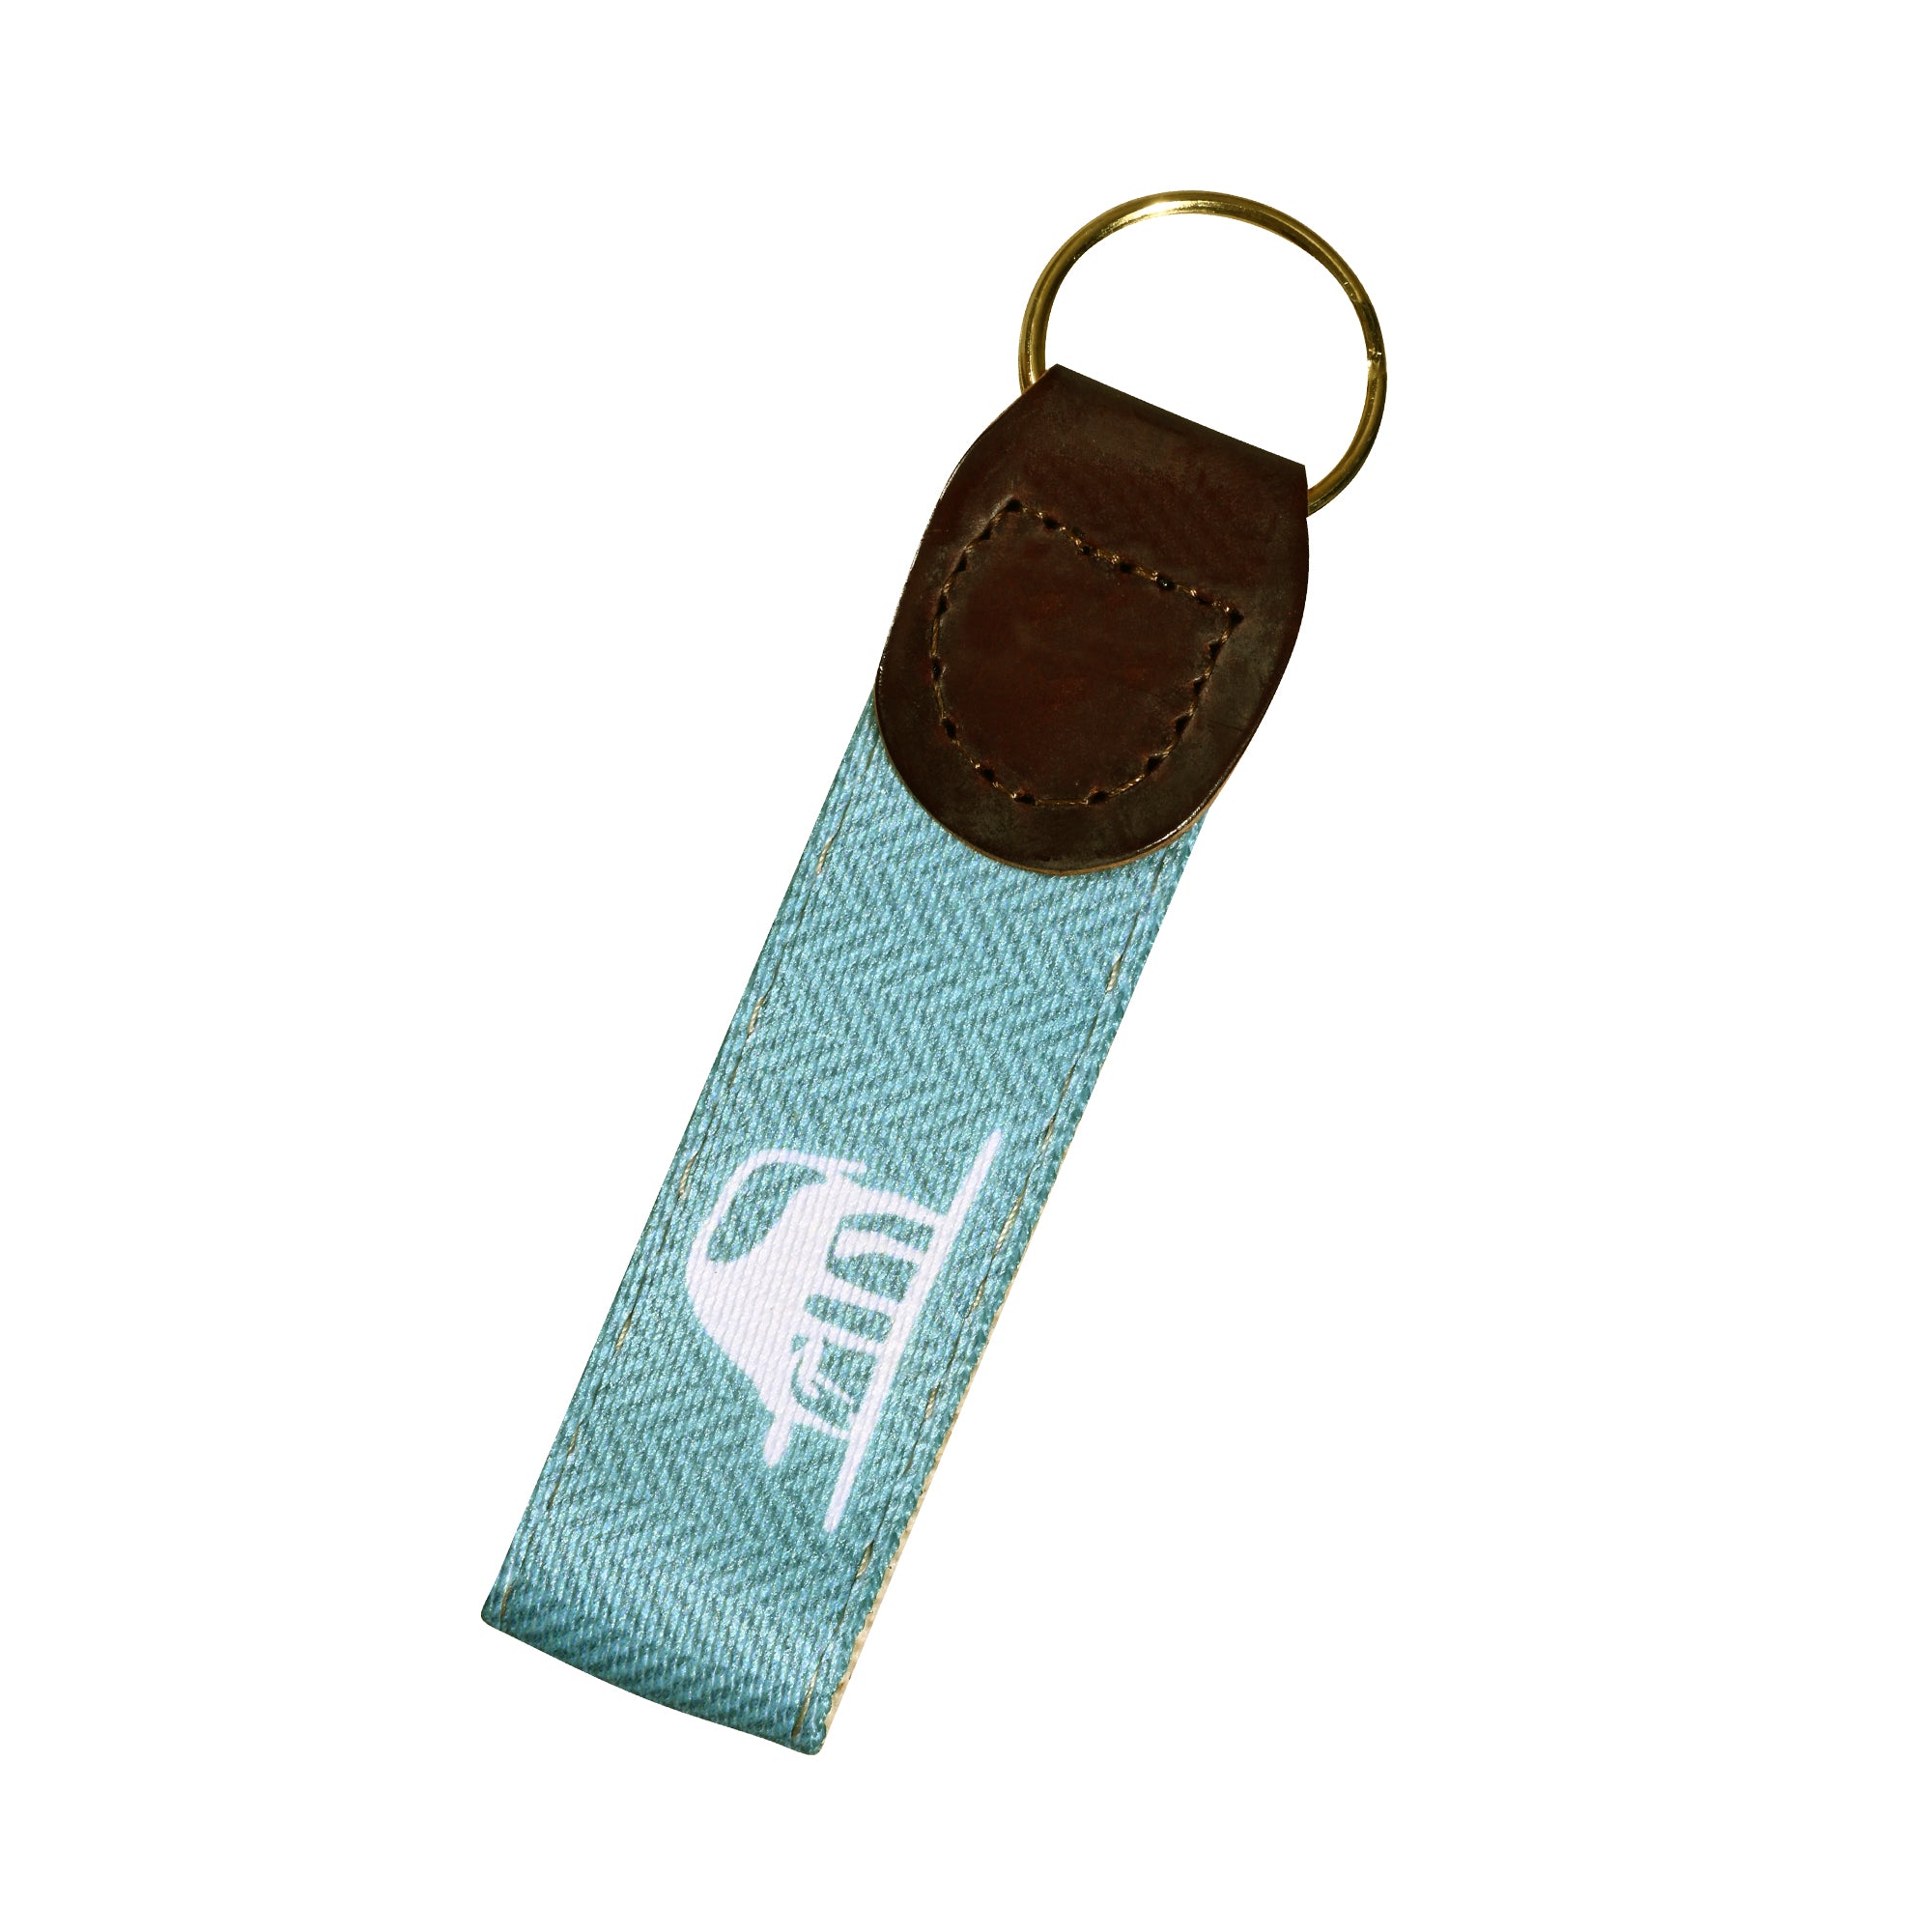 Keyring Jumby Bay Island Hotel Boutique Luxury Turquoise Accessories Destination Travel West Indies Oetker Collection